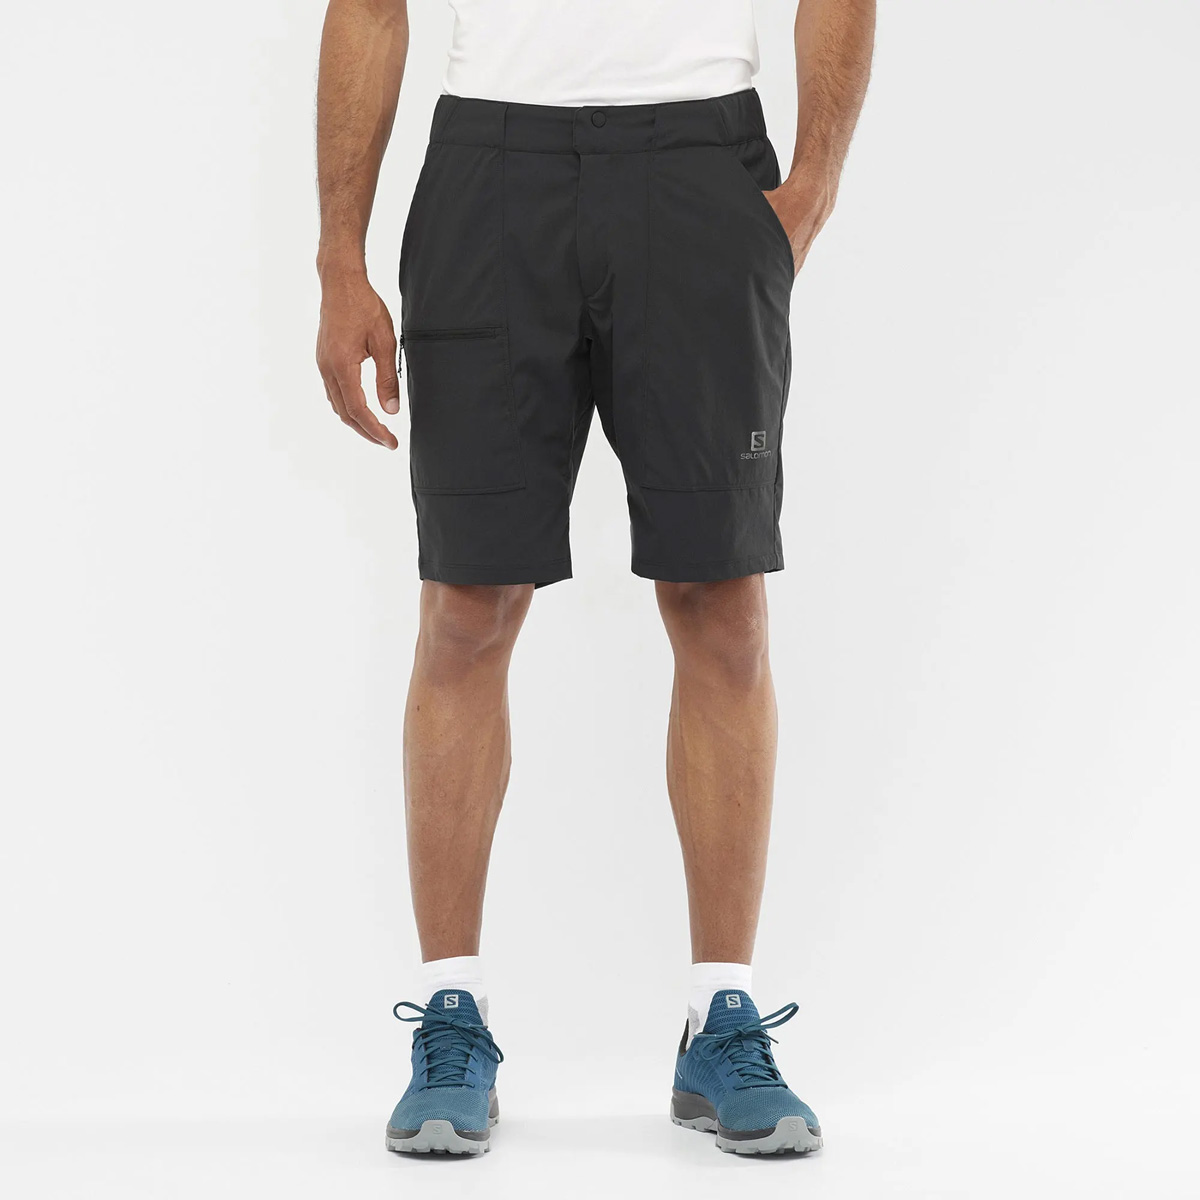 OUTRACK SHORTS M